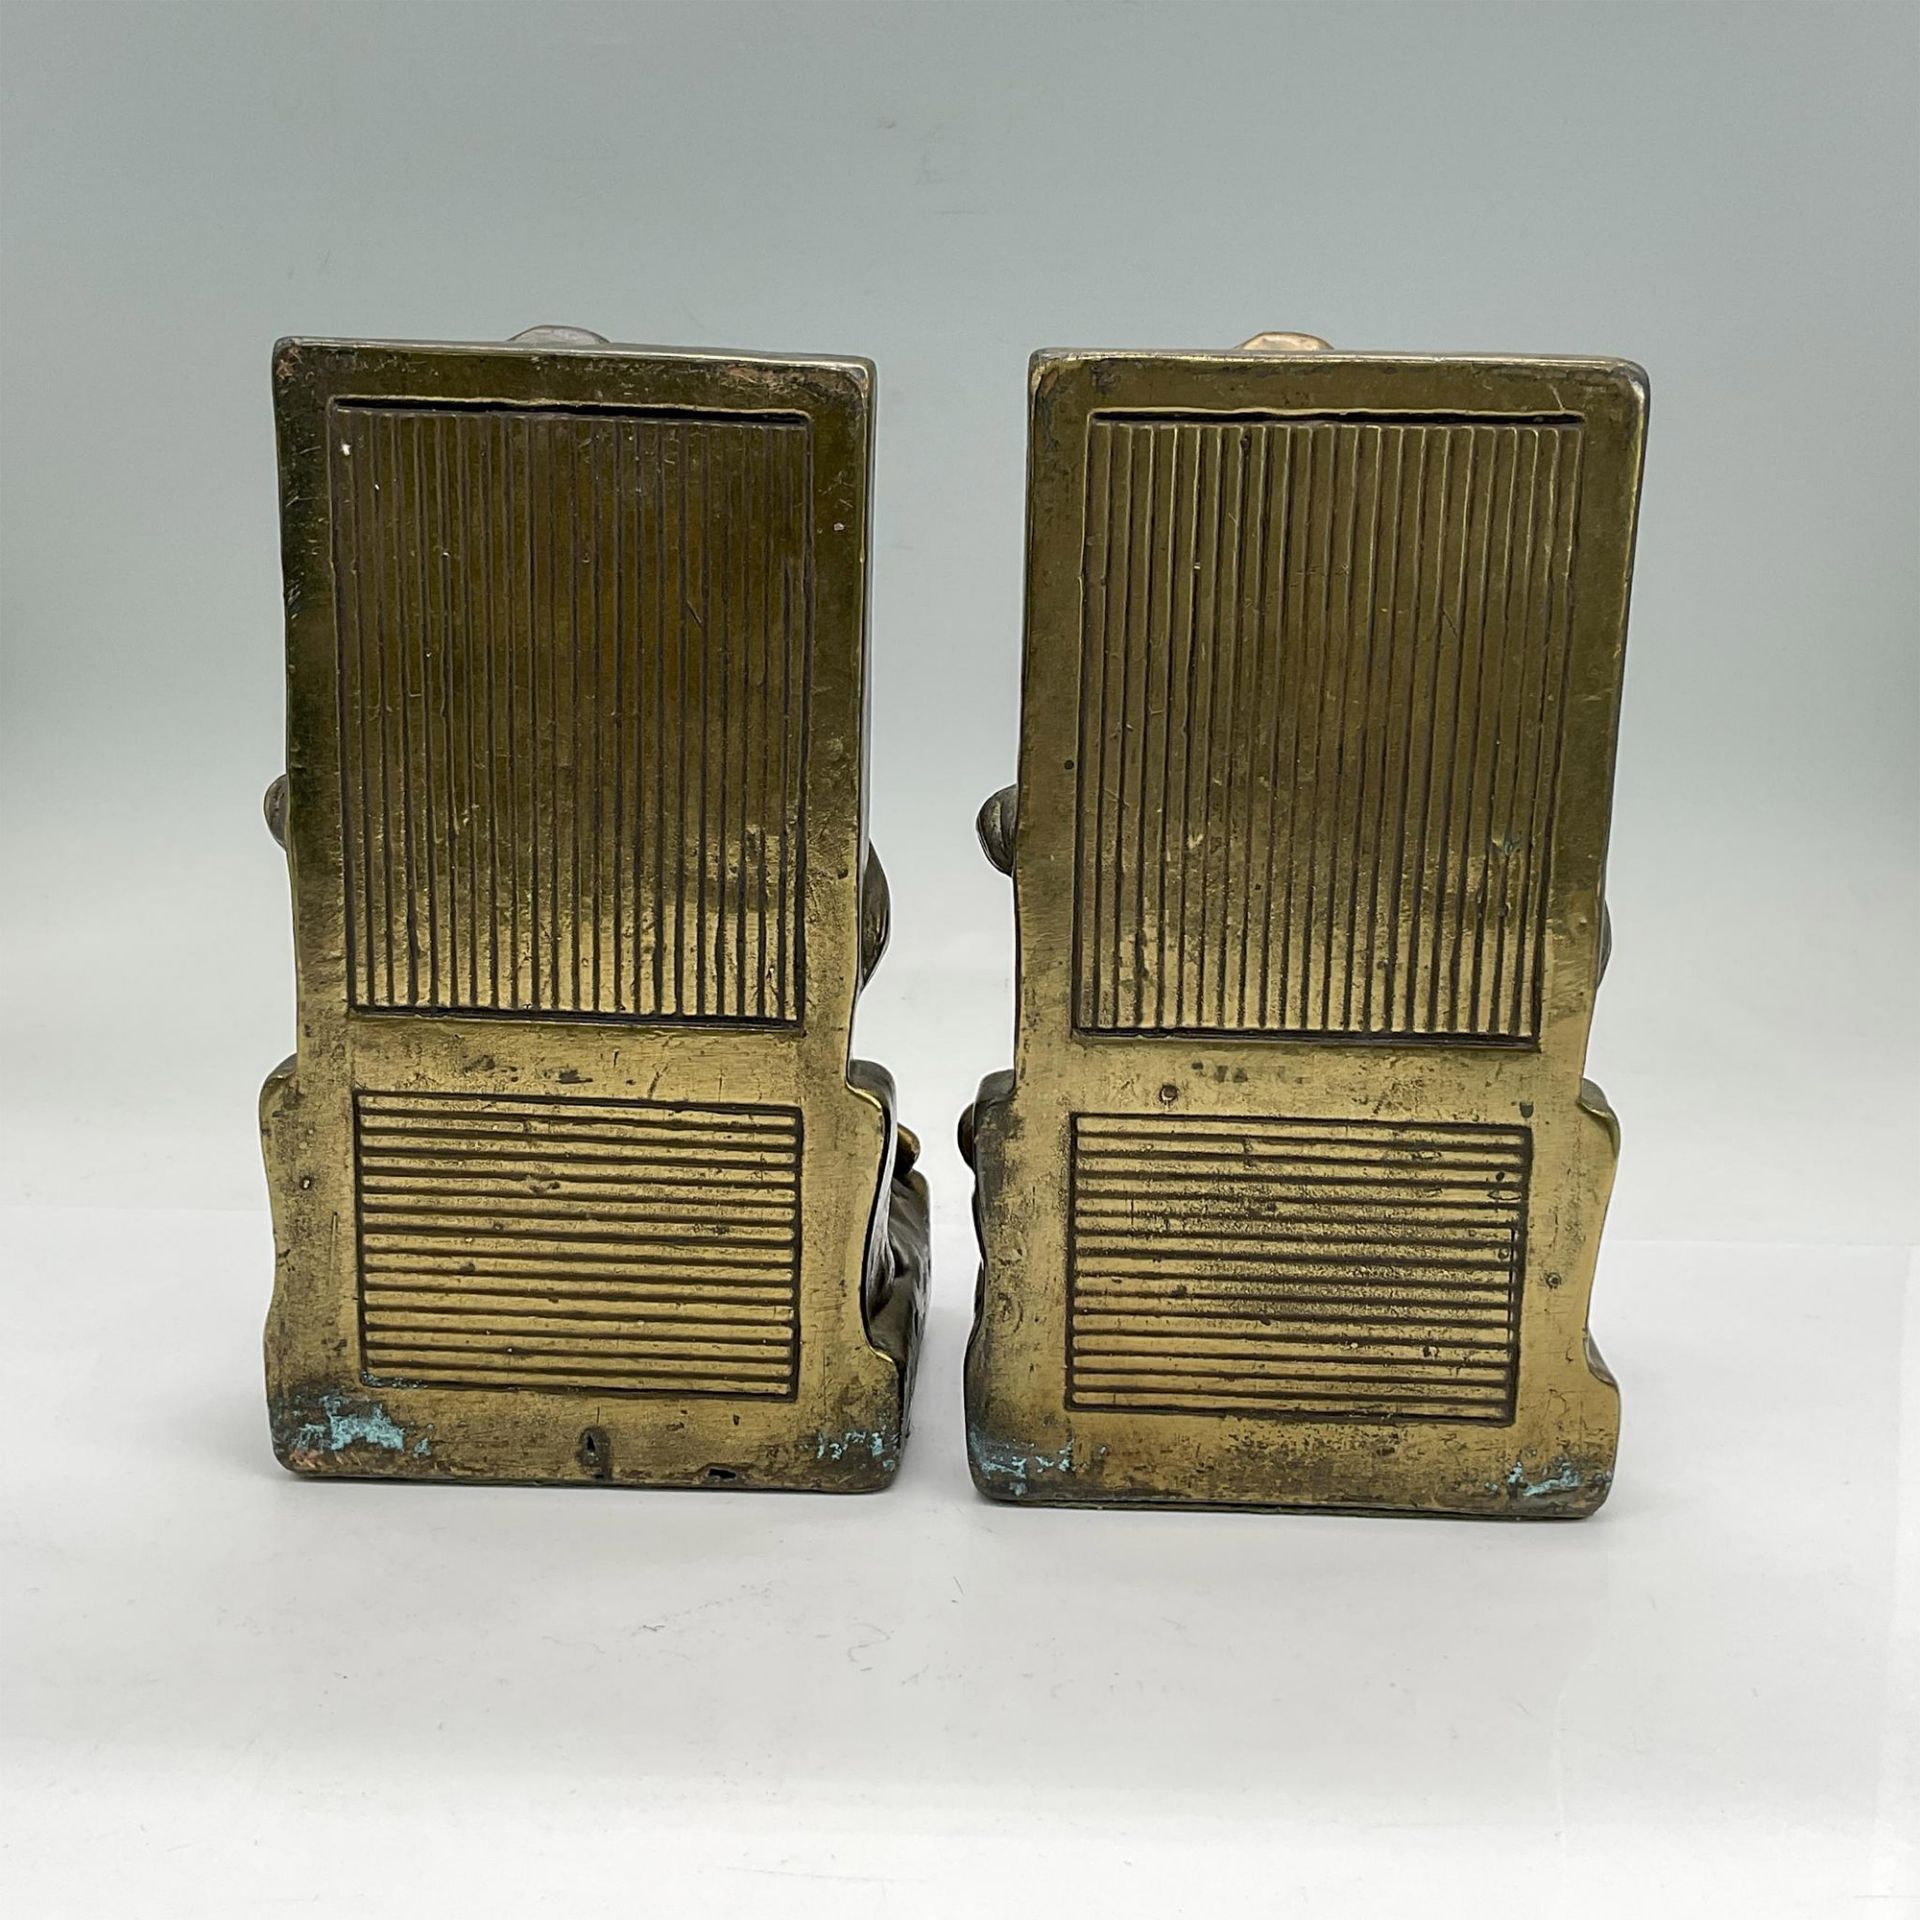 2pc Bronze Bookends, The Builder - Image 3 of 4